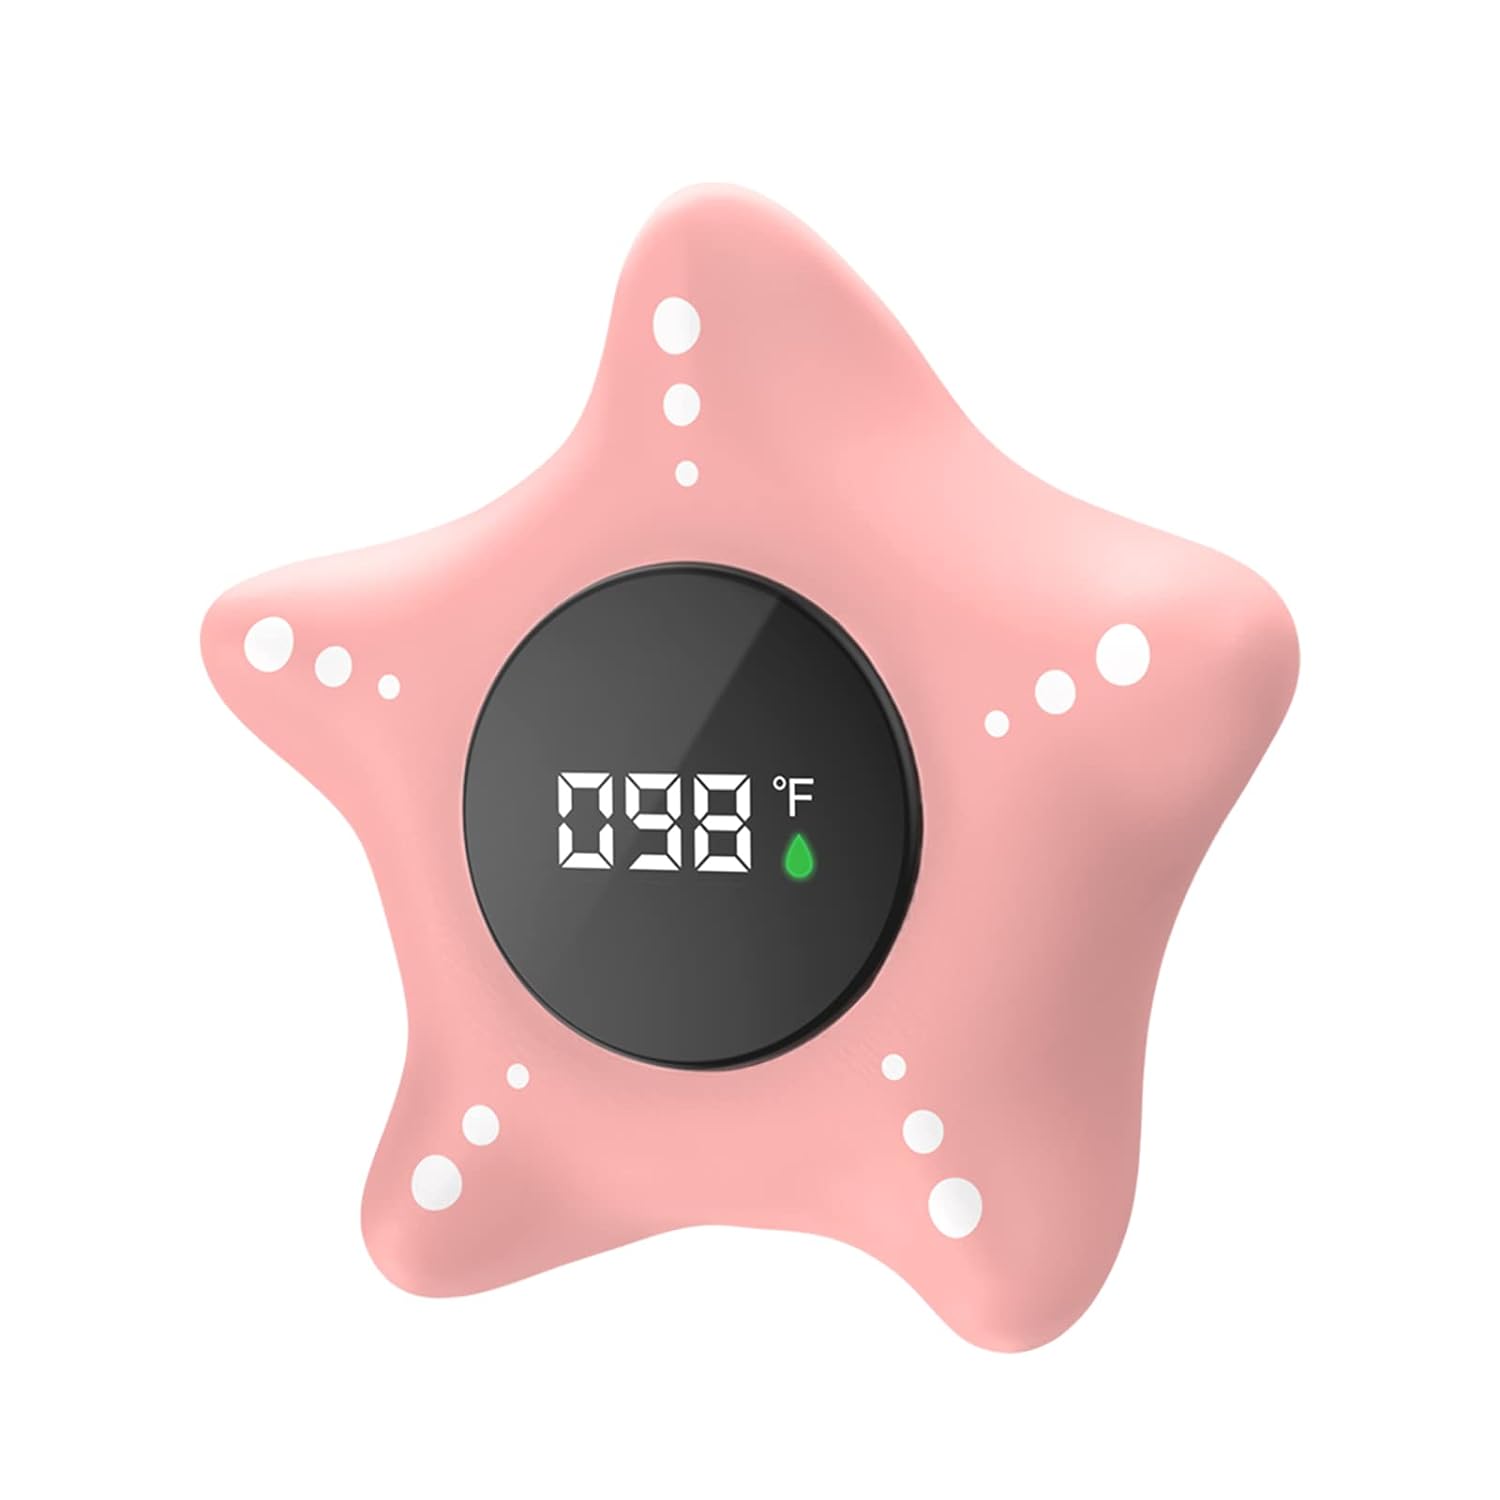 Baby Bath Thermometer Safety, Auto On & Off Bathtub Thermometer Floating Toy, Digital Bathing Water Temperature Warning Thermometer, Pink Sea Star Shape